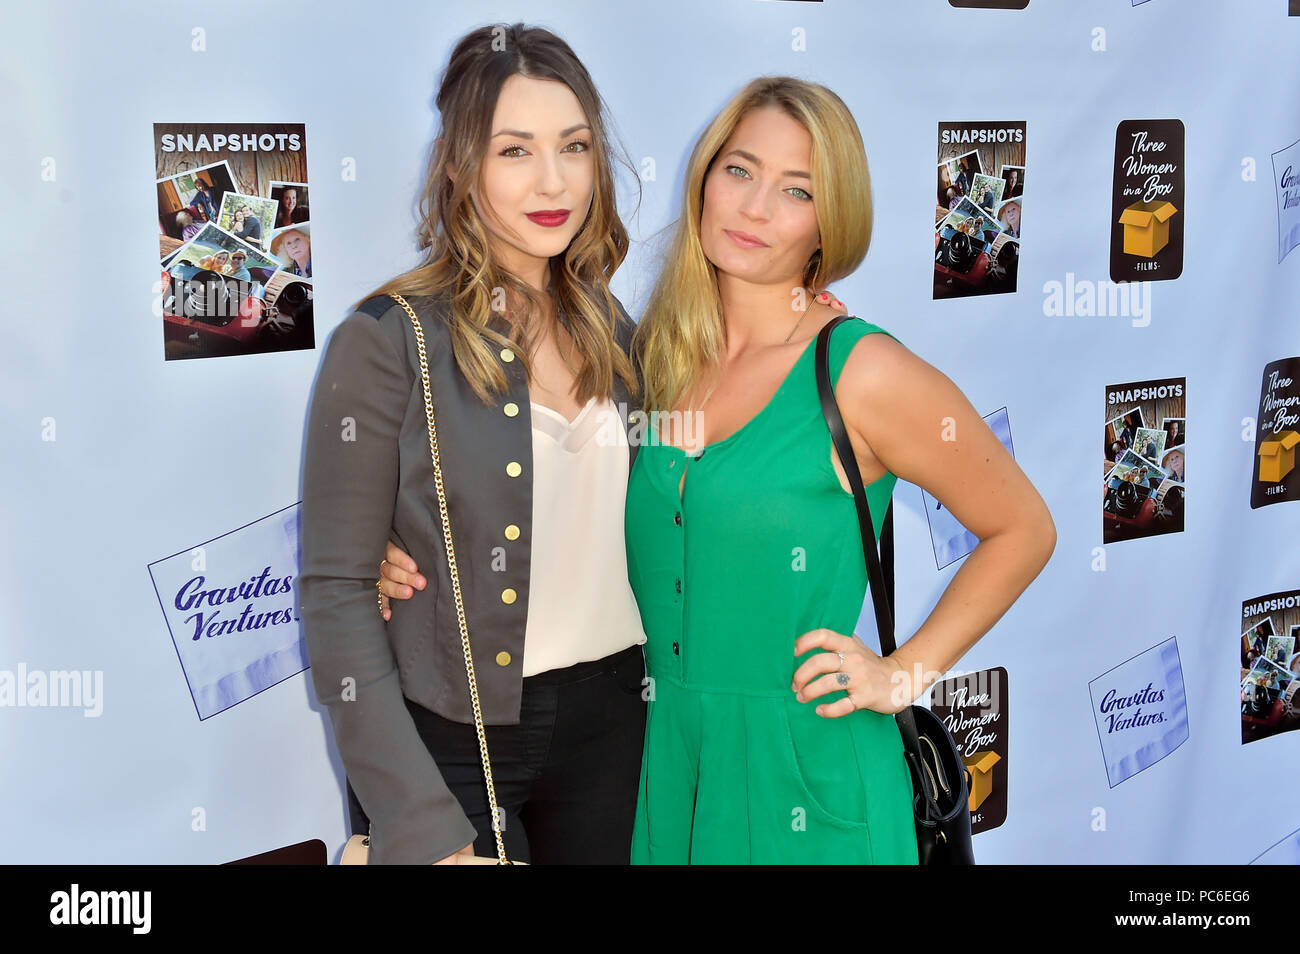 Beverly Hills, USA. 27th July, 2018. Nicola Posener and Daisye Tutor at the premiere of the movie 'Snapshots' at the Laemmle Music Hall. Beverly Hills, 27.07.2018 | usage worldwide Credit: dpa/Alamy Live News Stock Photo